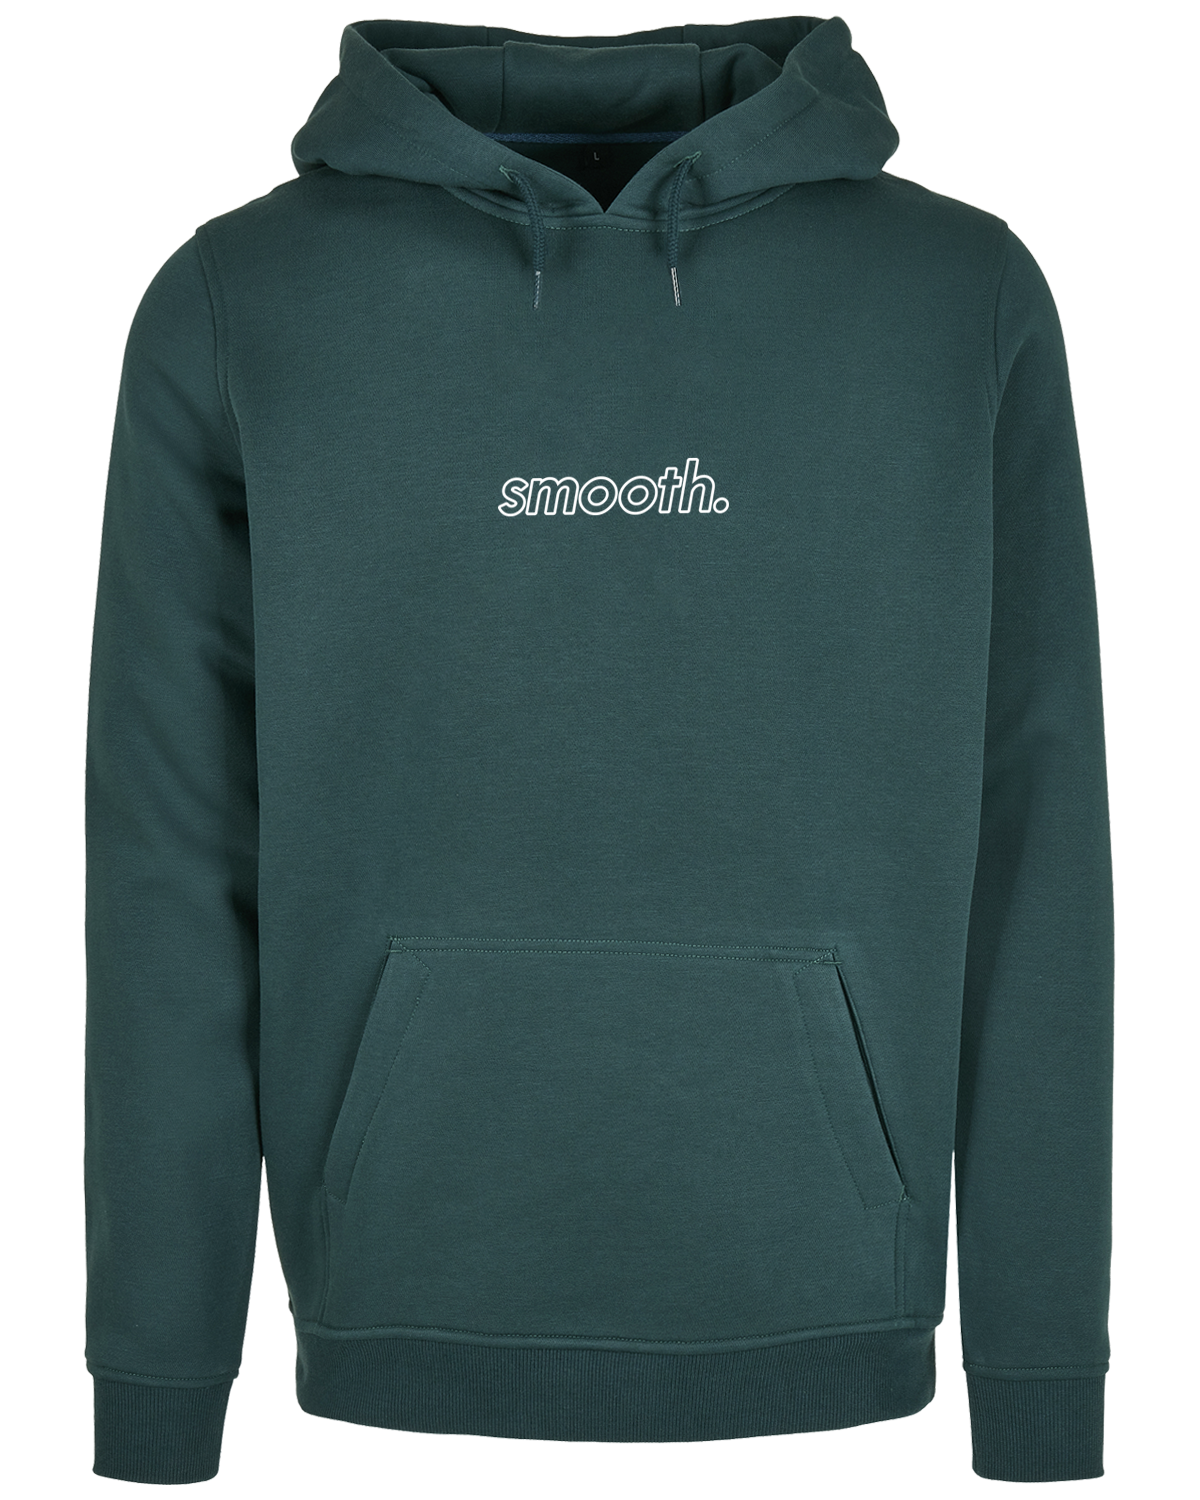 Emerald Kids Hoodie / Outlined White Girls